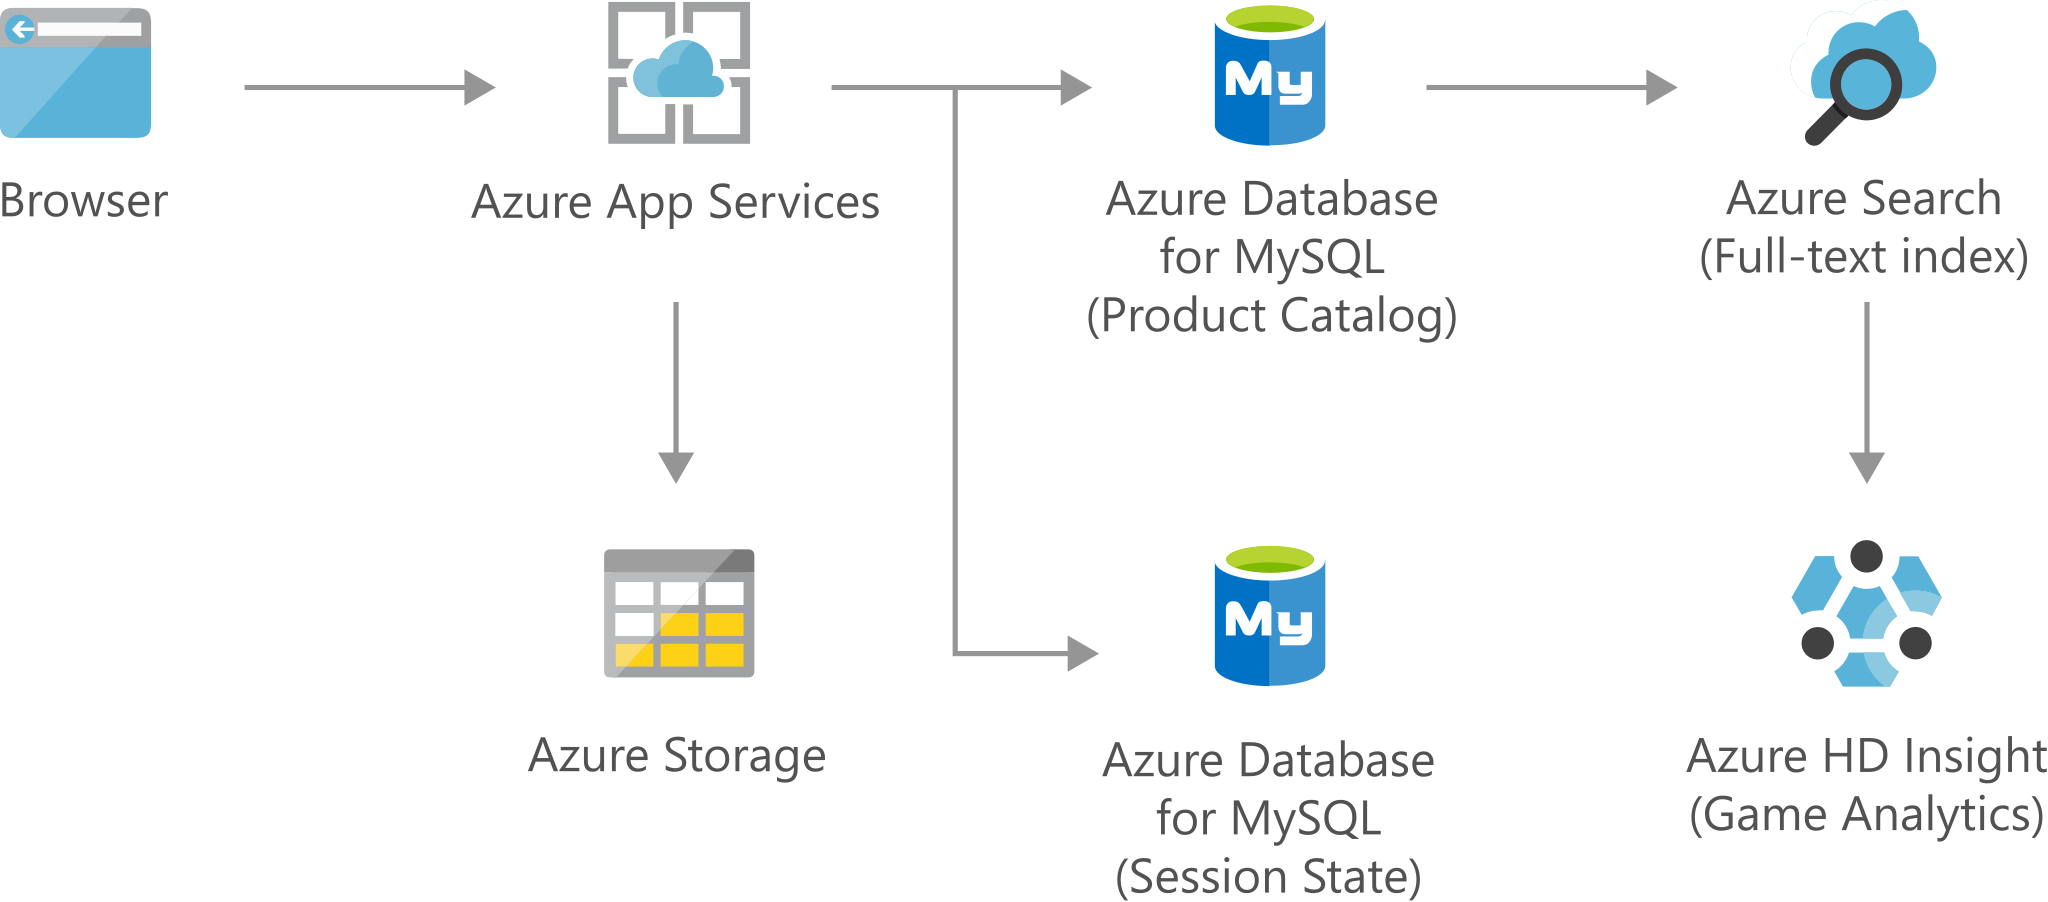 Architecture diagram shows data into Azure App Services, to Azure Storage and databases, through Azure Search and into Azure H D Insight.